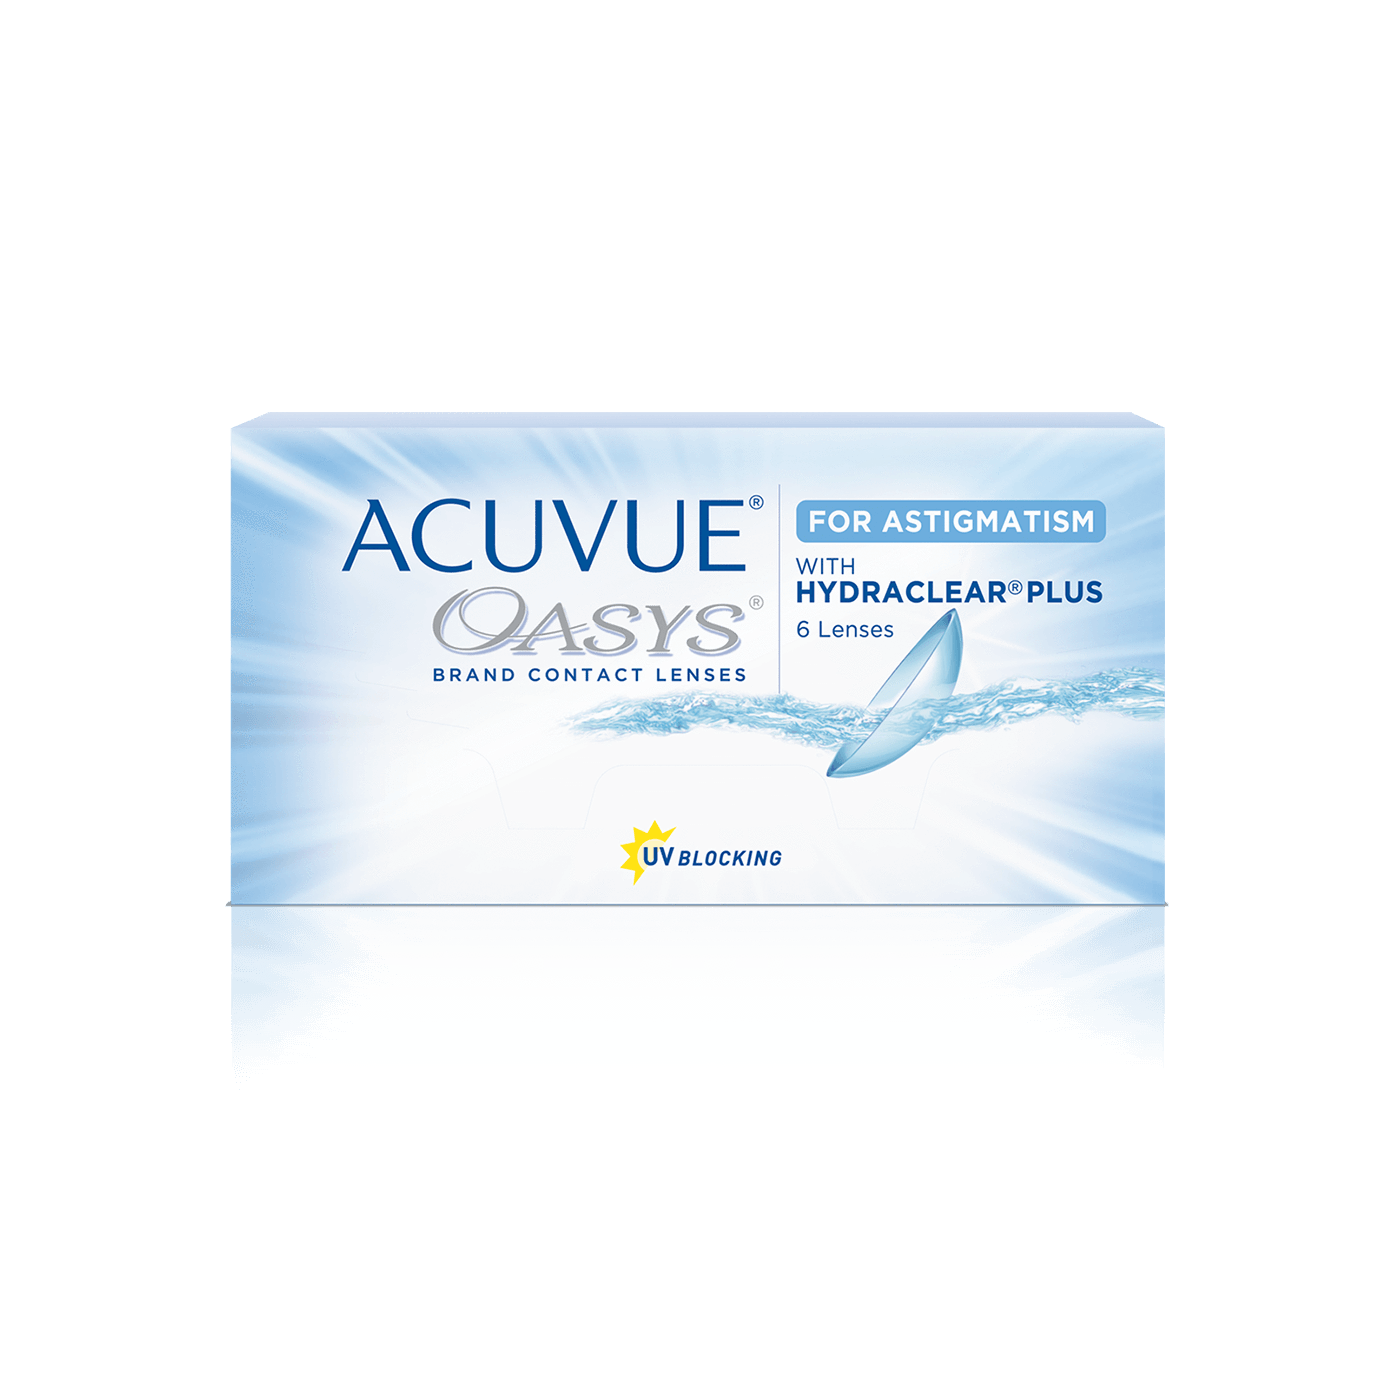 ACUVUE OASYS® for ASTIGMATISM 2-Week Contact Lenses